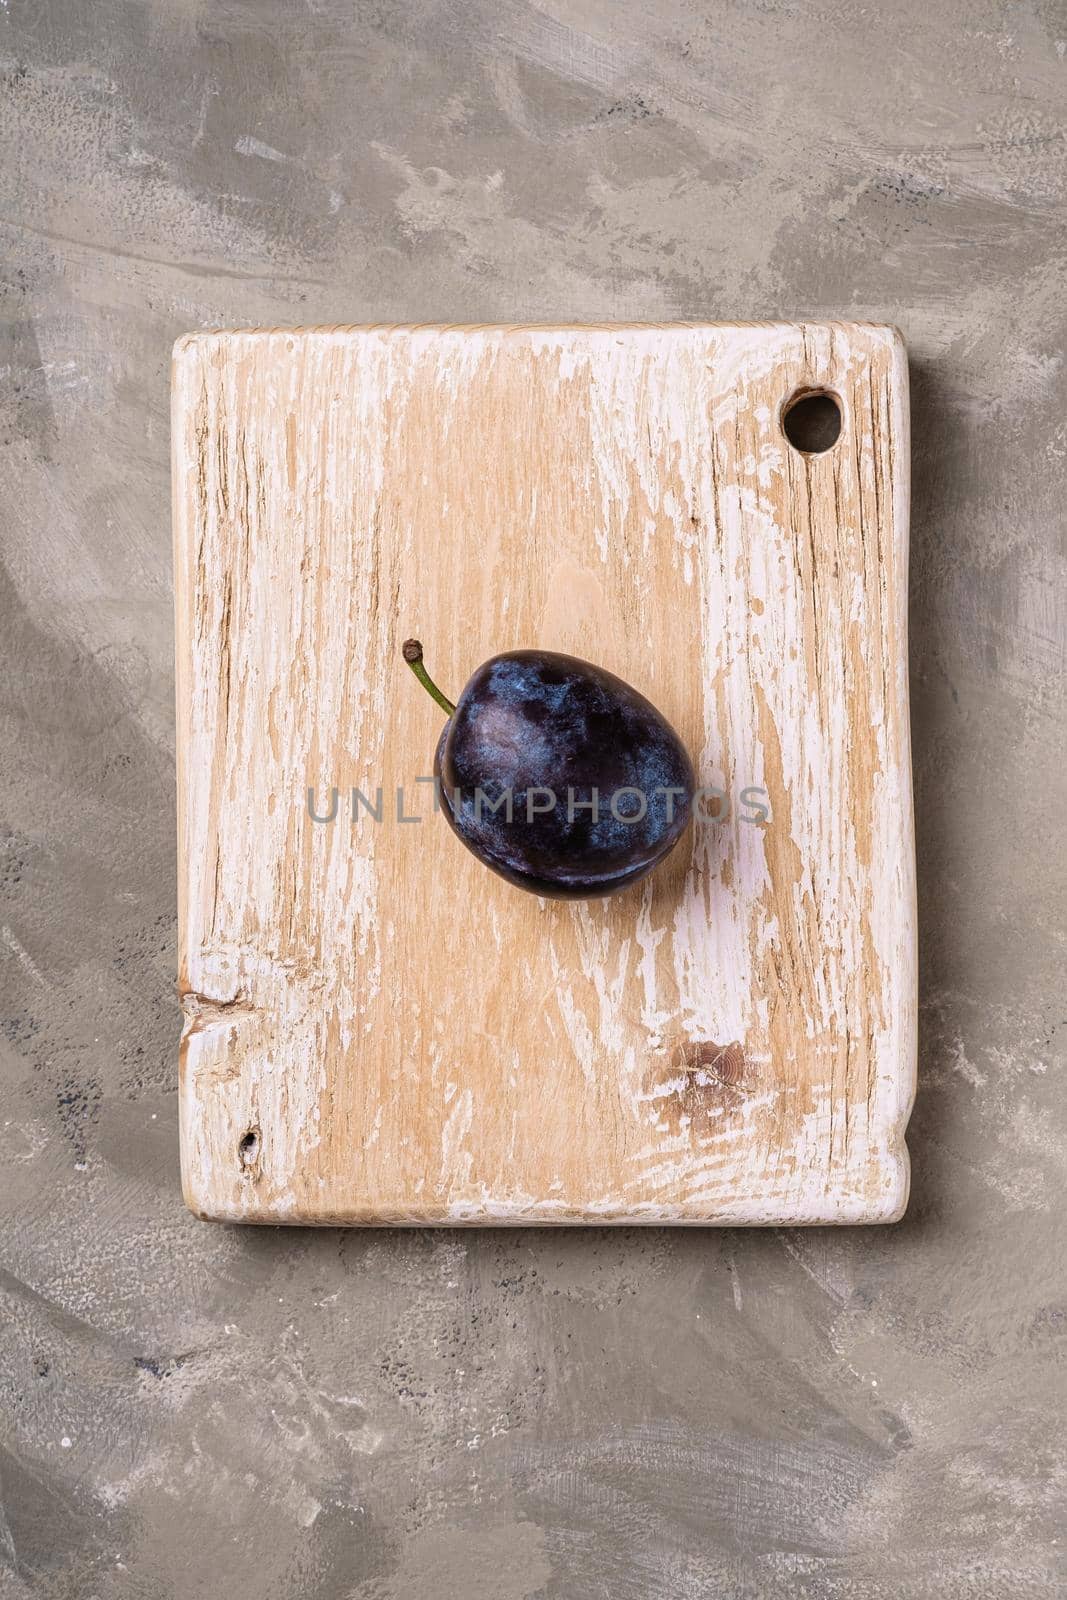 Fresh ripe plum fruit on wooden cutting board, stone concrete background, top view